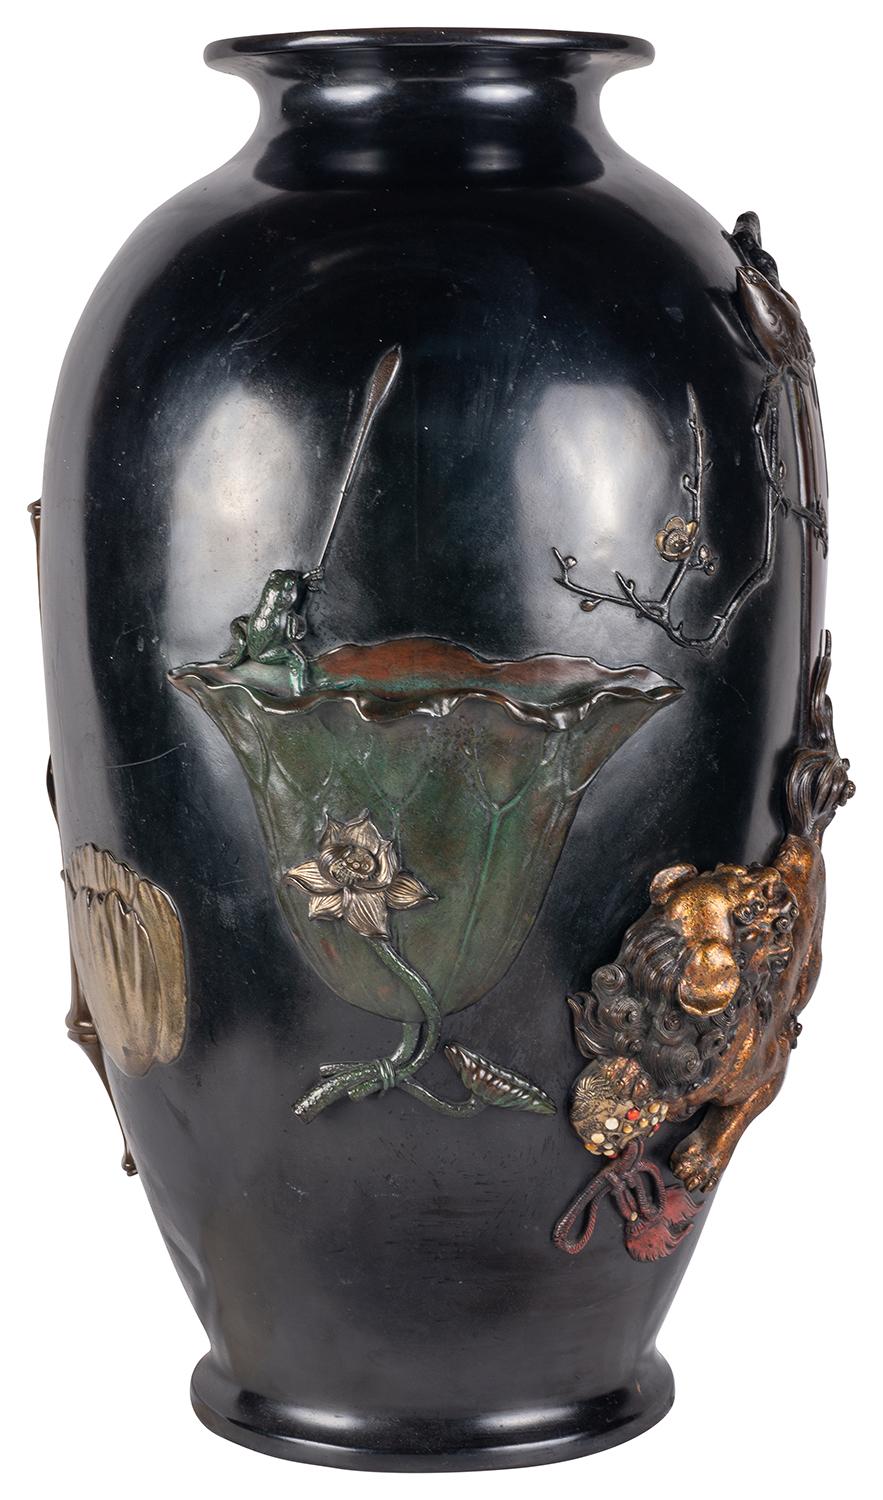 A wonderful Japanese Meiji period (1868-1912) Bronze overlay vase. Having exquisite and amusing scenes in relief, patinated and overlay of a Dog of Foo, a Frog fishing in a Lotus leaf cup, a Bamboo and bronze vase and jardiniere. a larger bronze